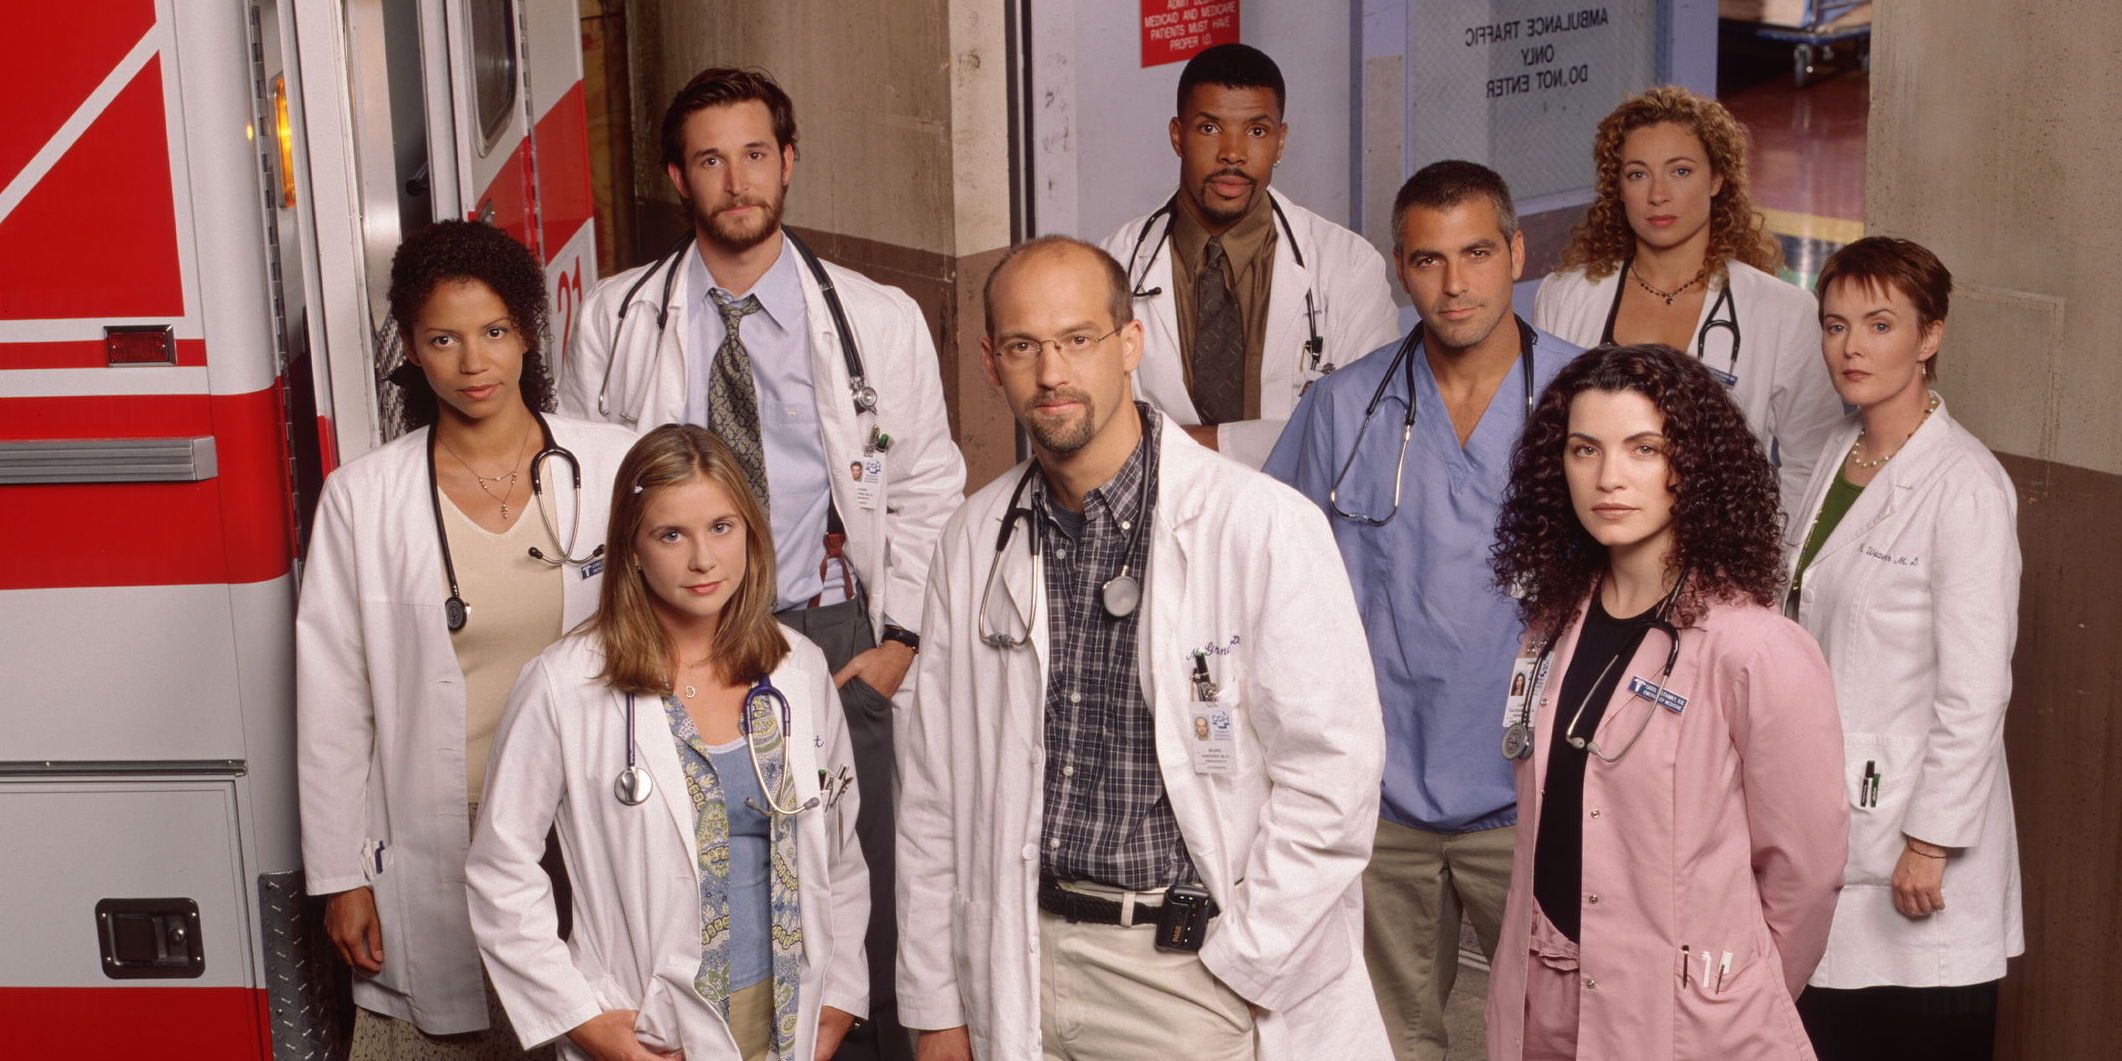 ER 10 Storylines That Were Never Resolved